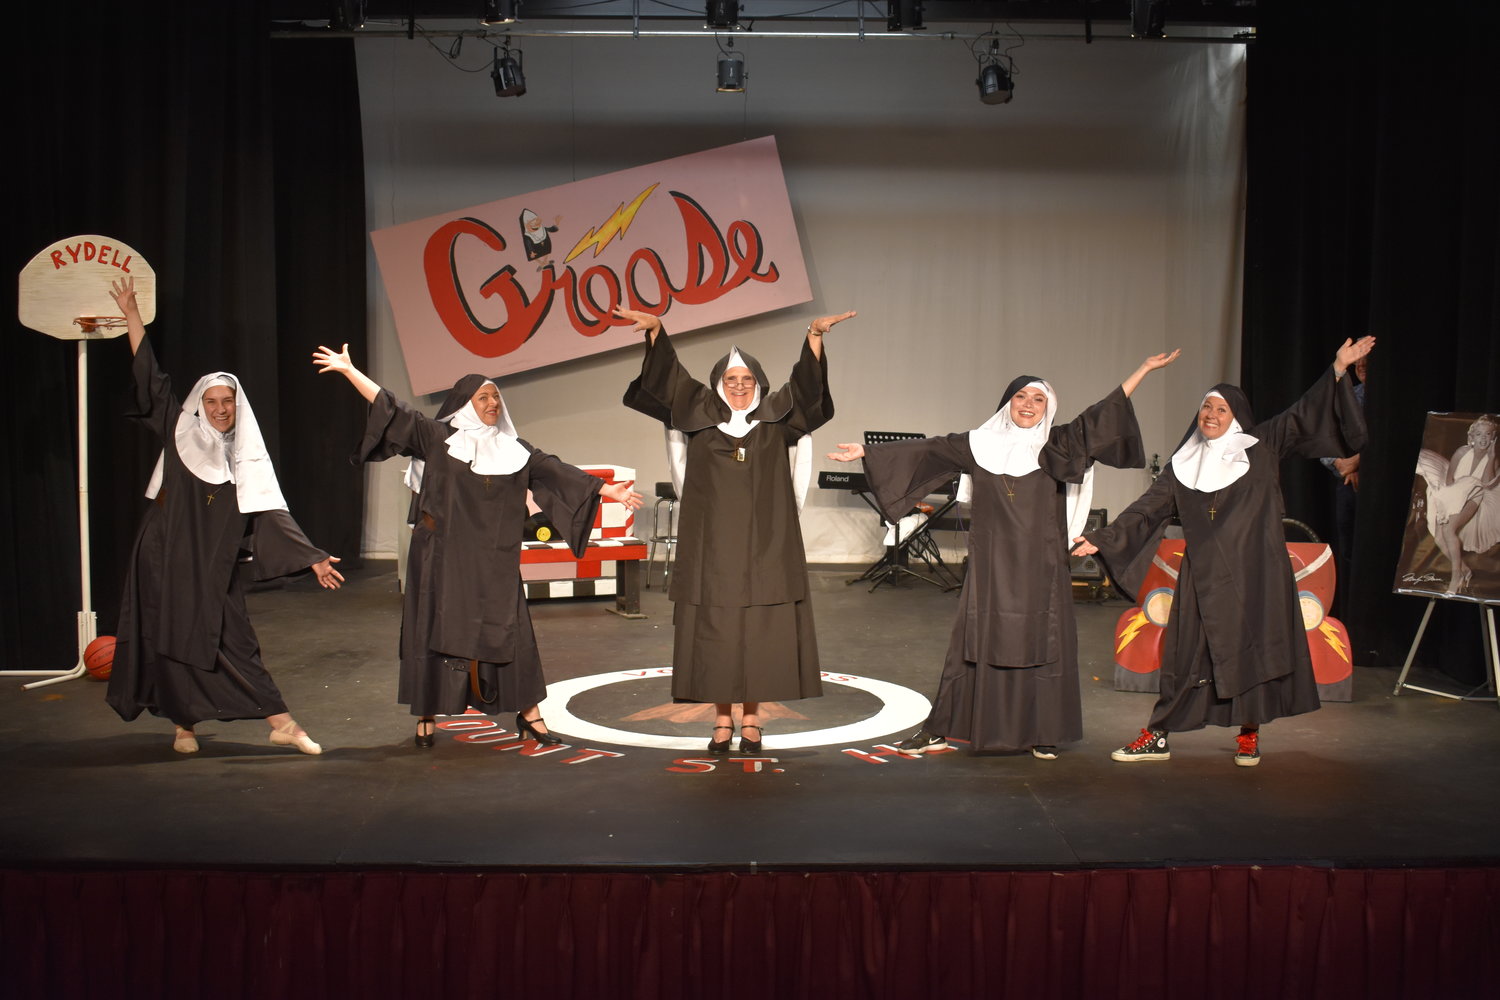 The cast of Las Cruces Community Theatre’s current production of “Nunsense” is, left to right, Jada Bryant, Shari DuMond, Judy Bethmann, Isabella Candelaria and Janet Beatty-Payne.